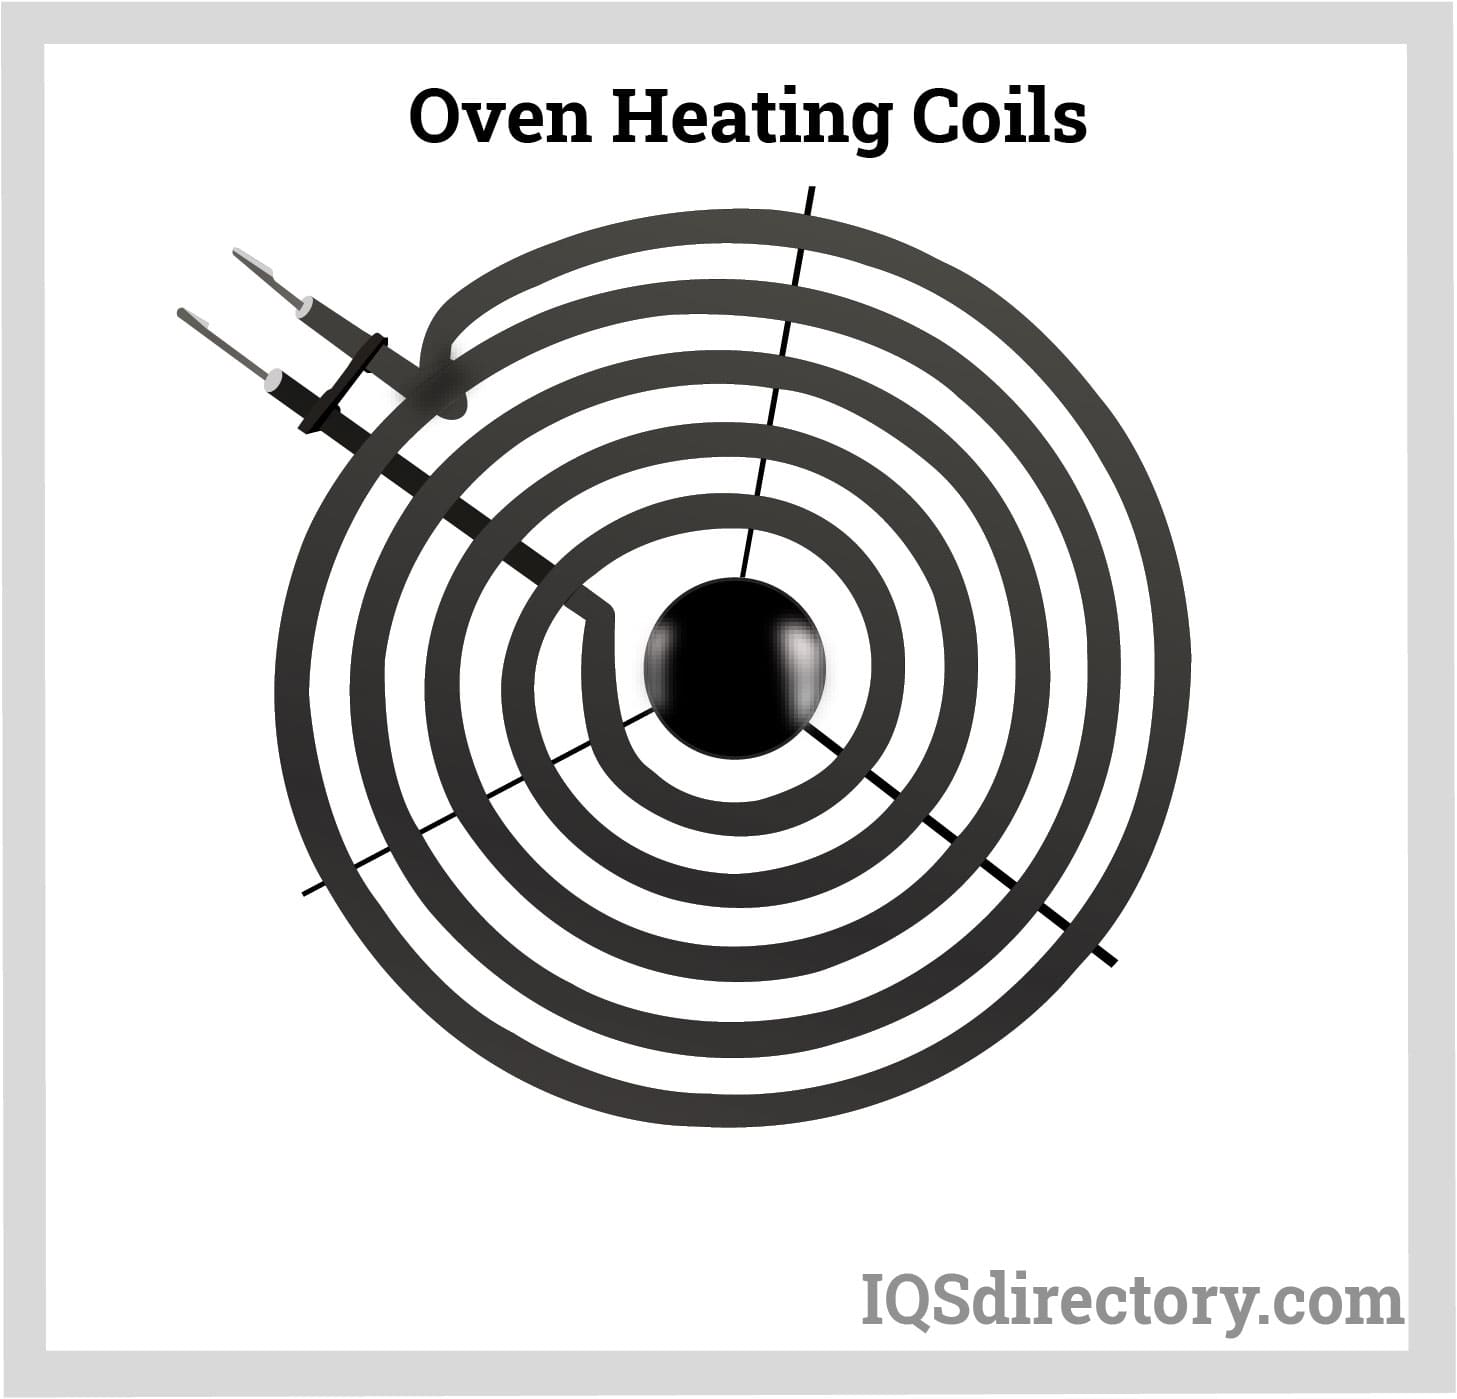 Oven Heating Coils